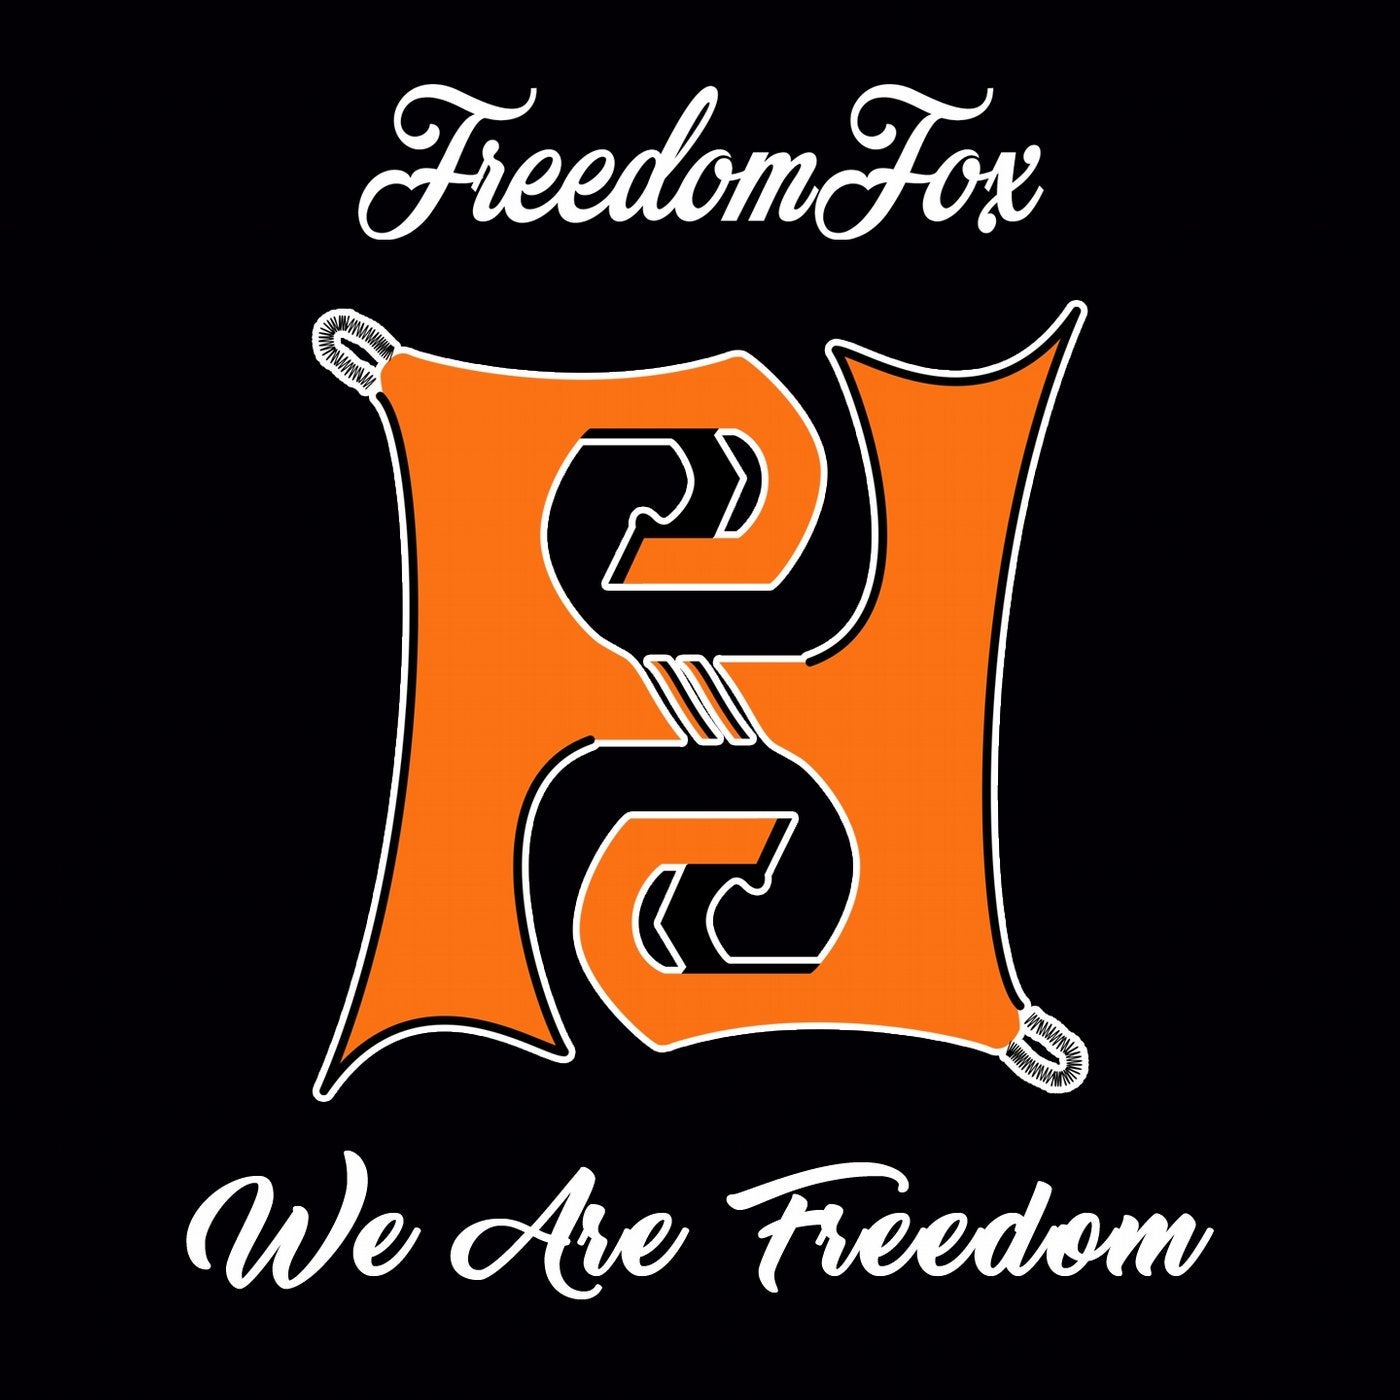 We Are Freedom